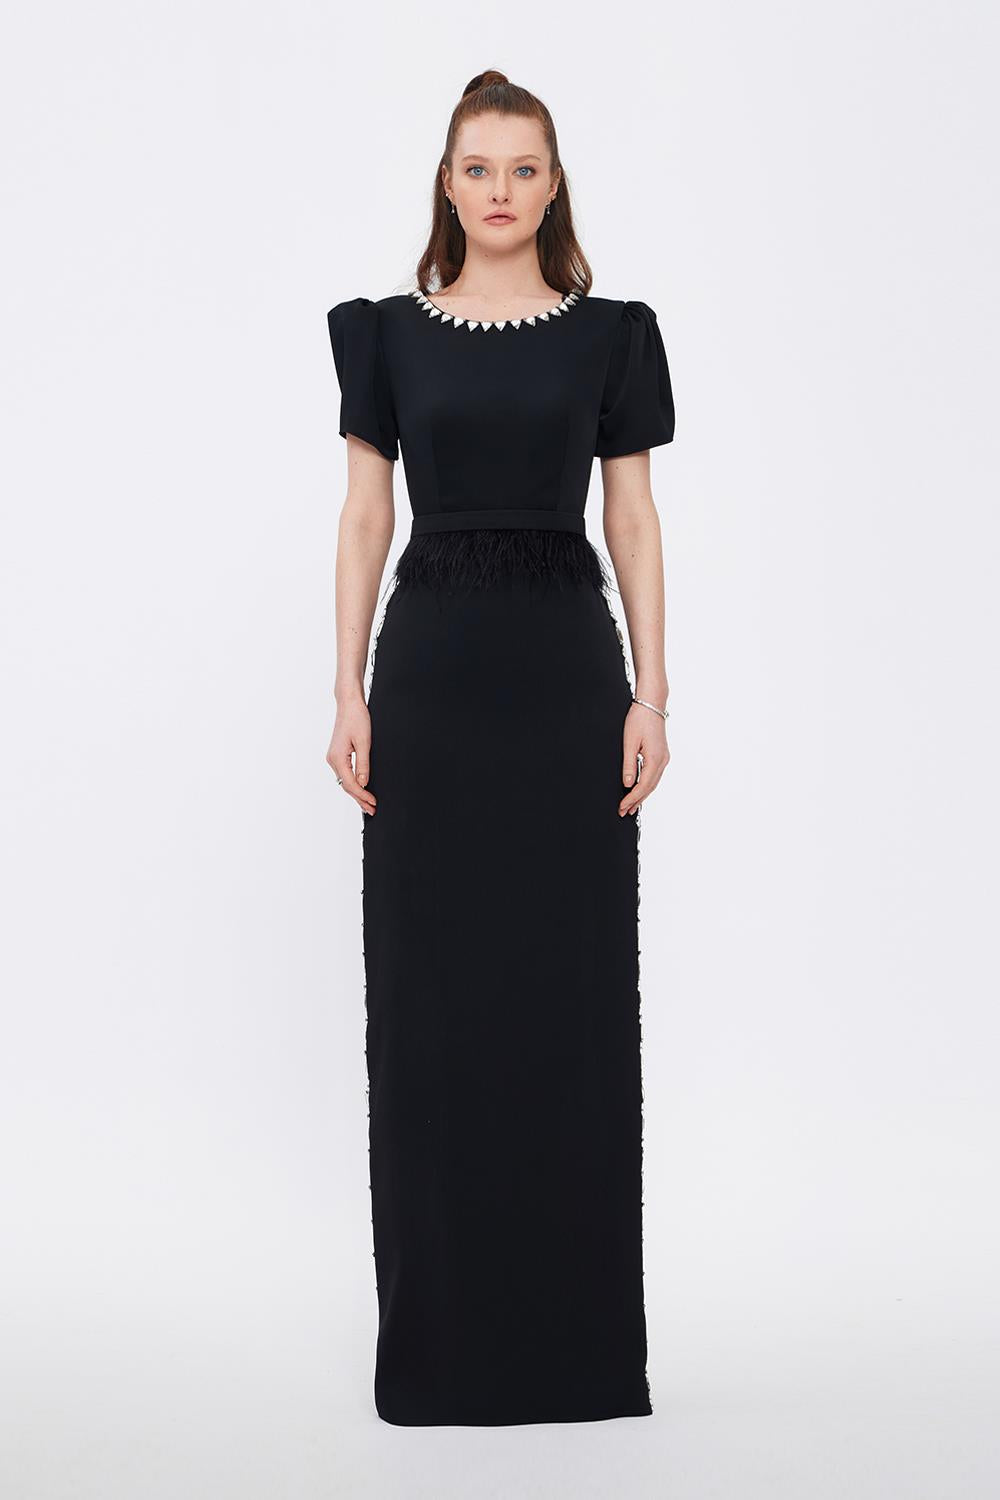 Stone Embroidered Long Black Evening Dress